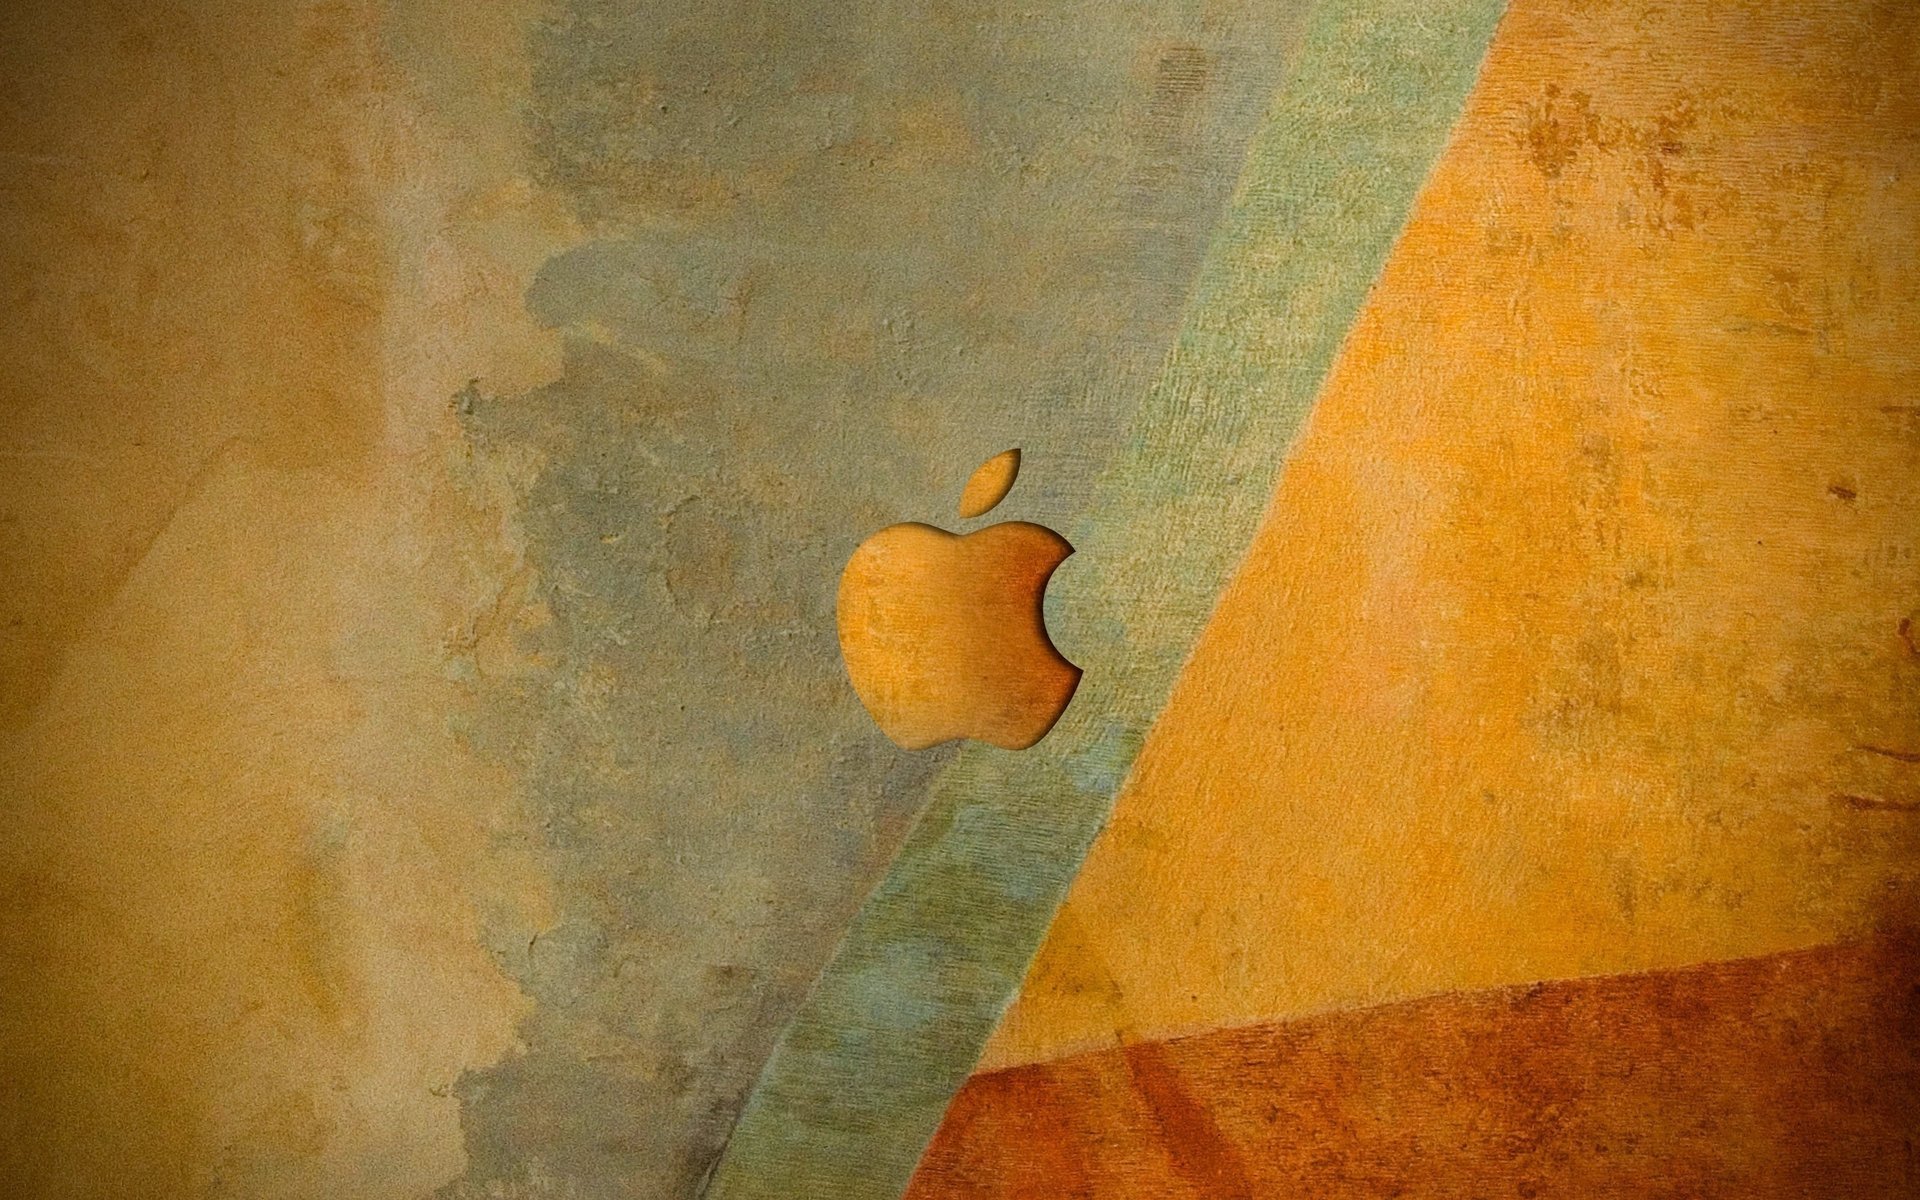 Apple logo in orange shades on the background of the wall